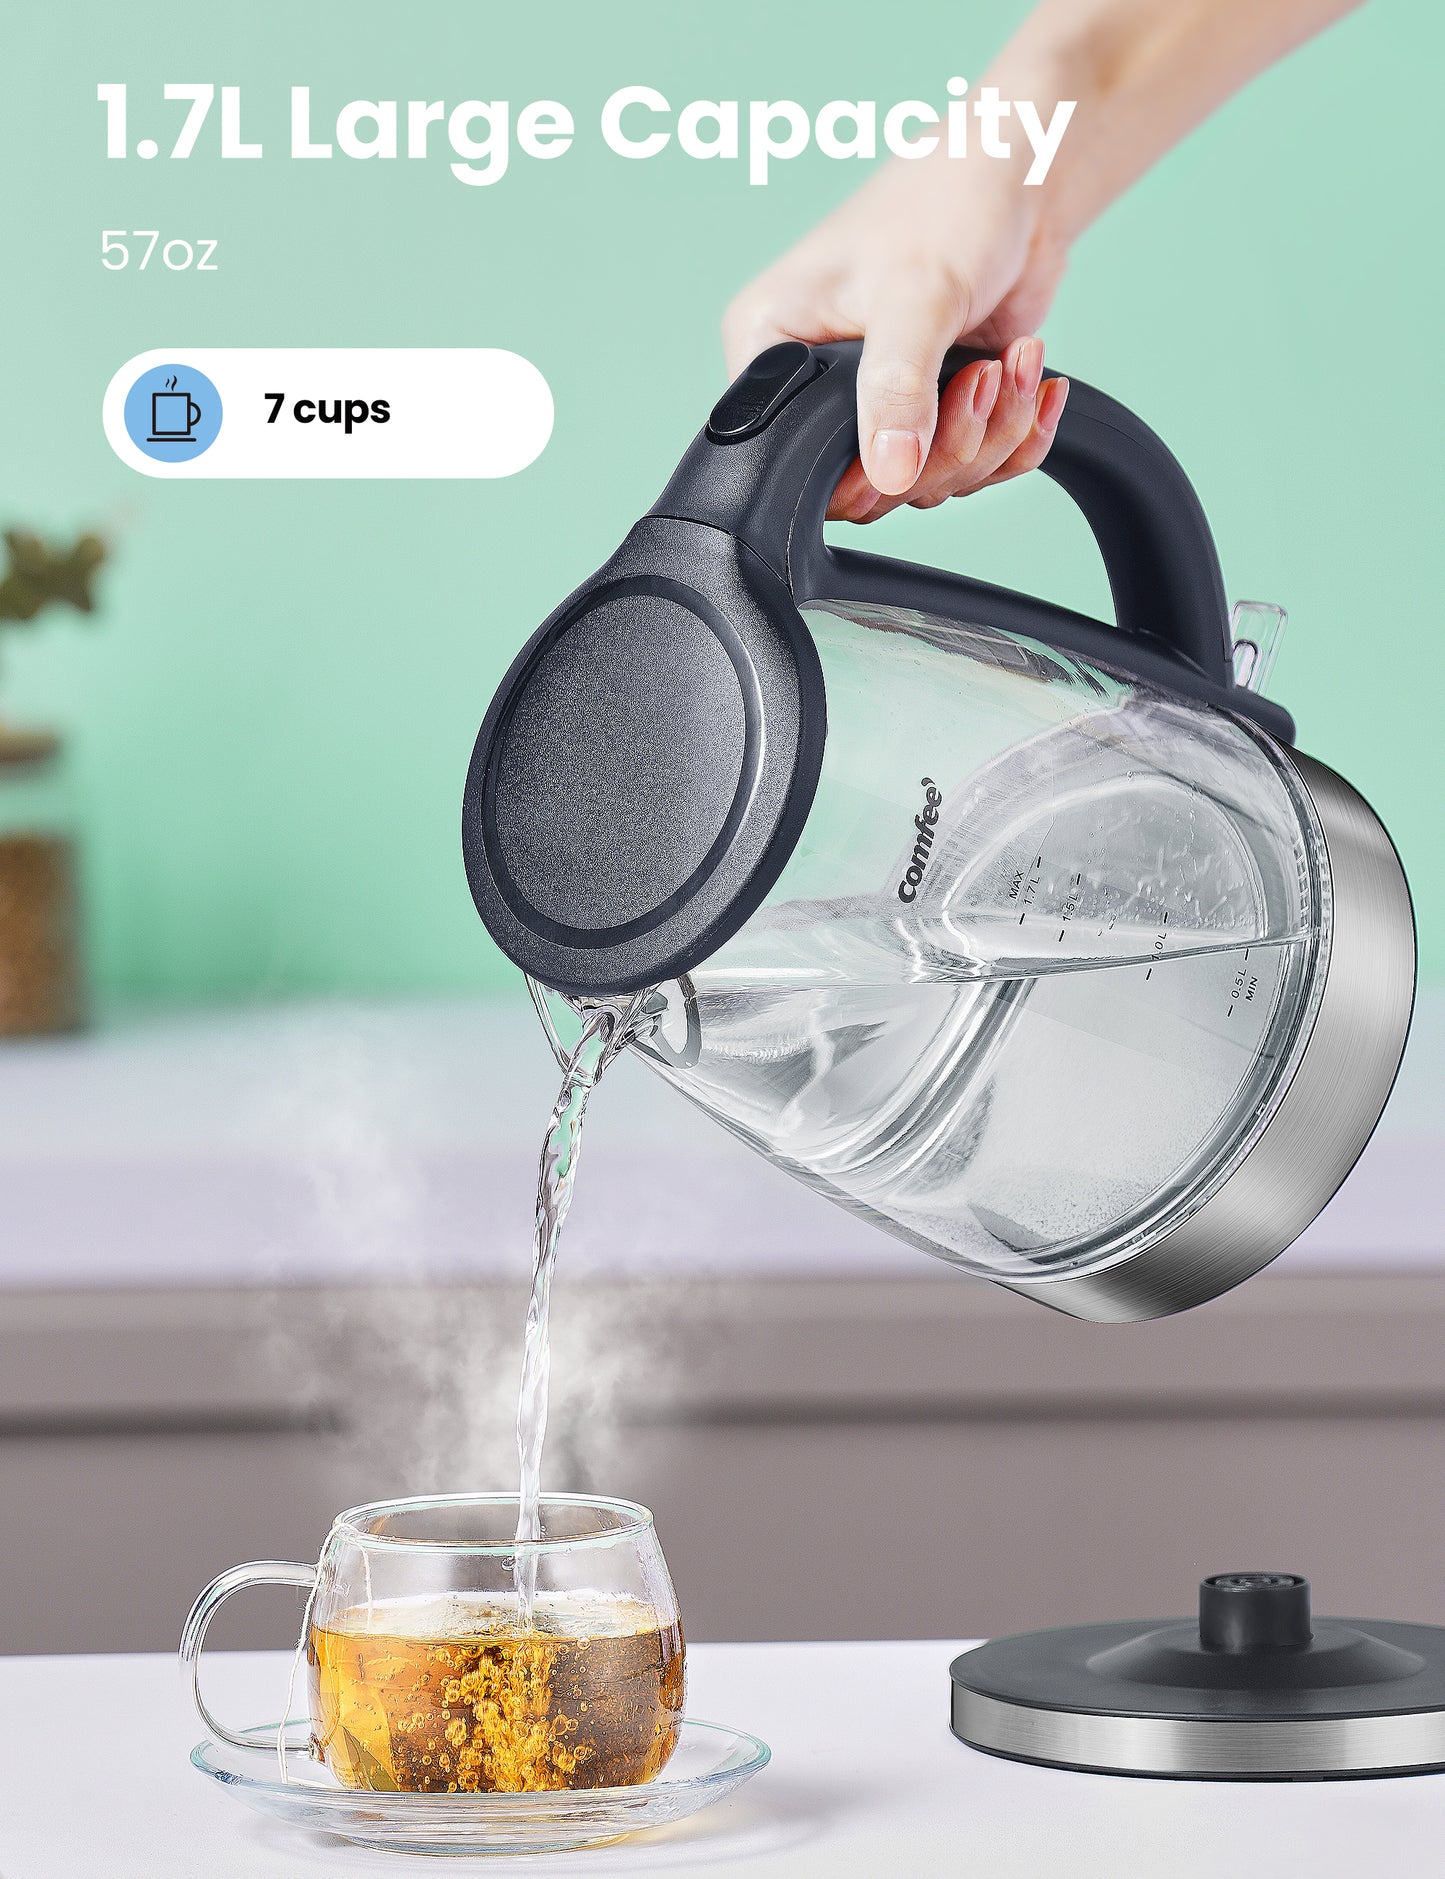 comfee electric glass kettle contains 1.7L capacity